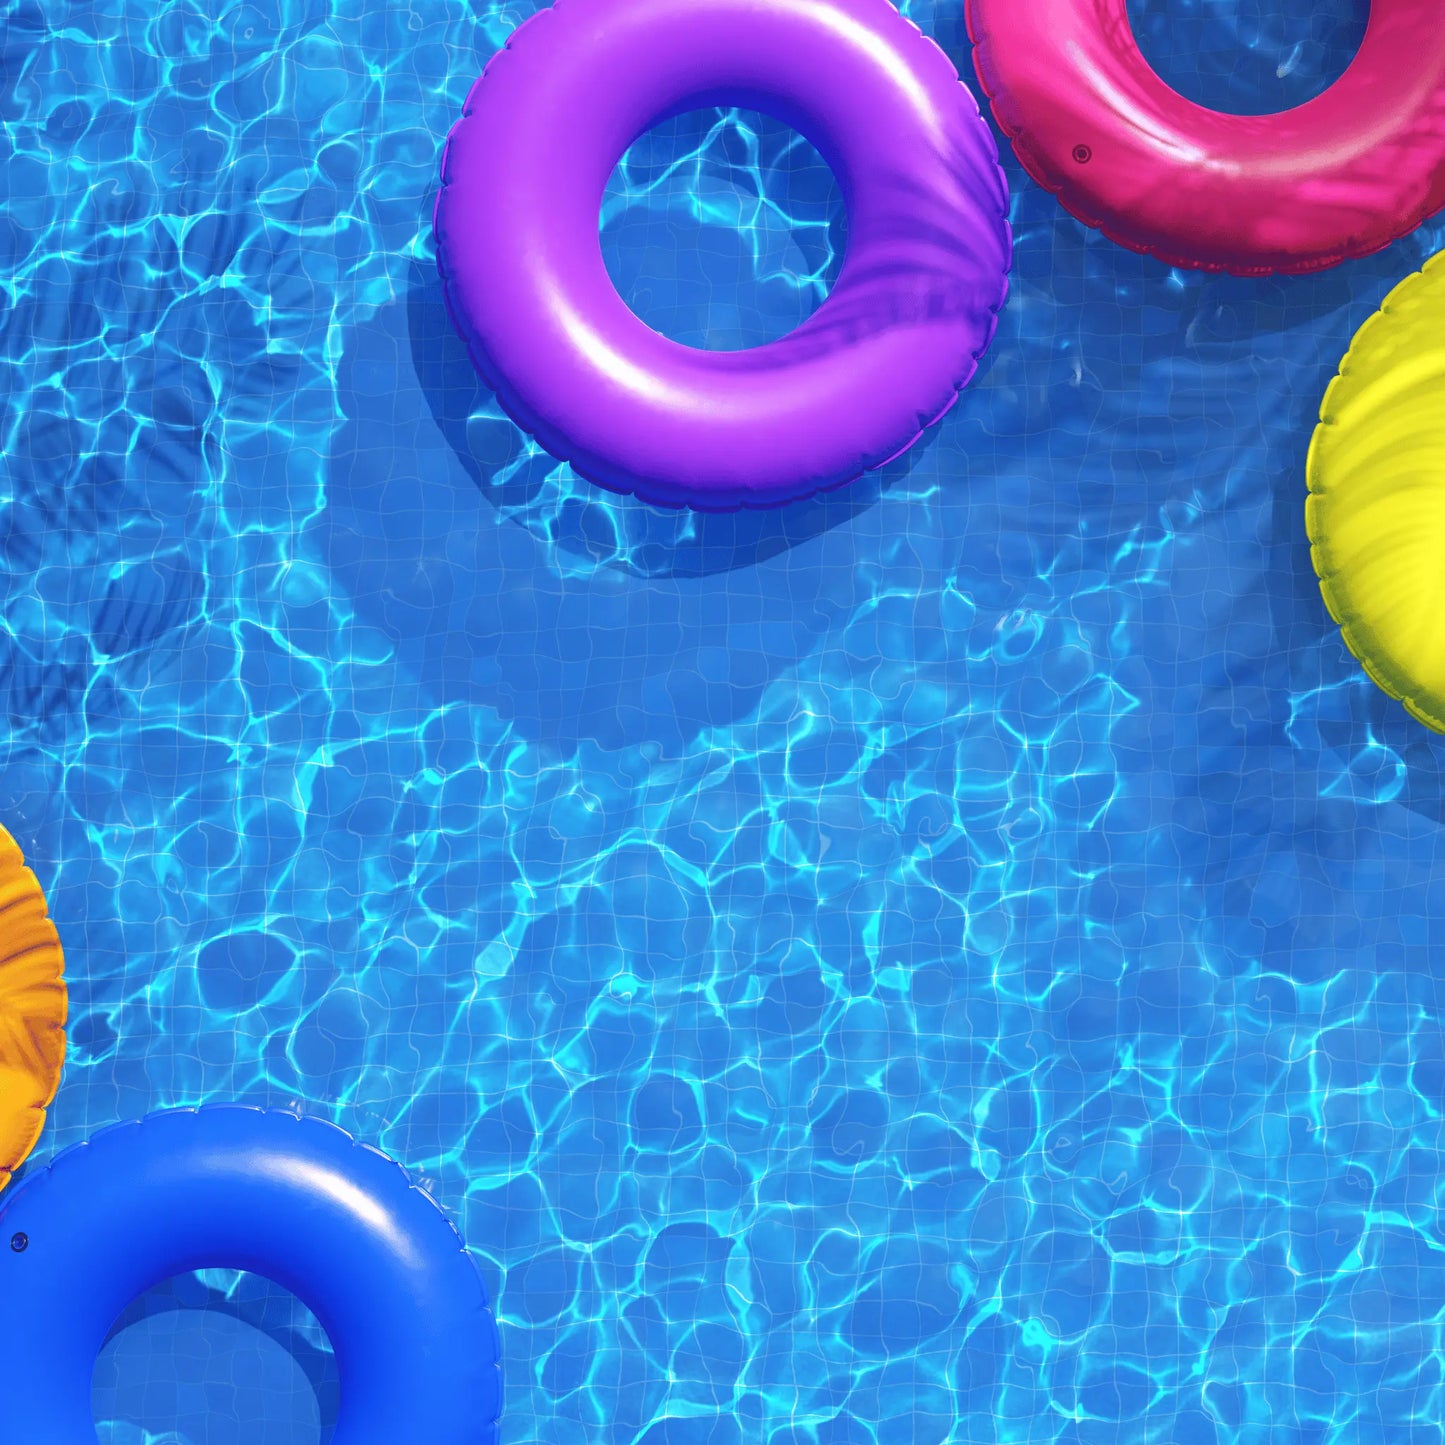 NAT11067001 Conduct a pool safety inspection course (DEPOSIT)